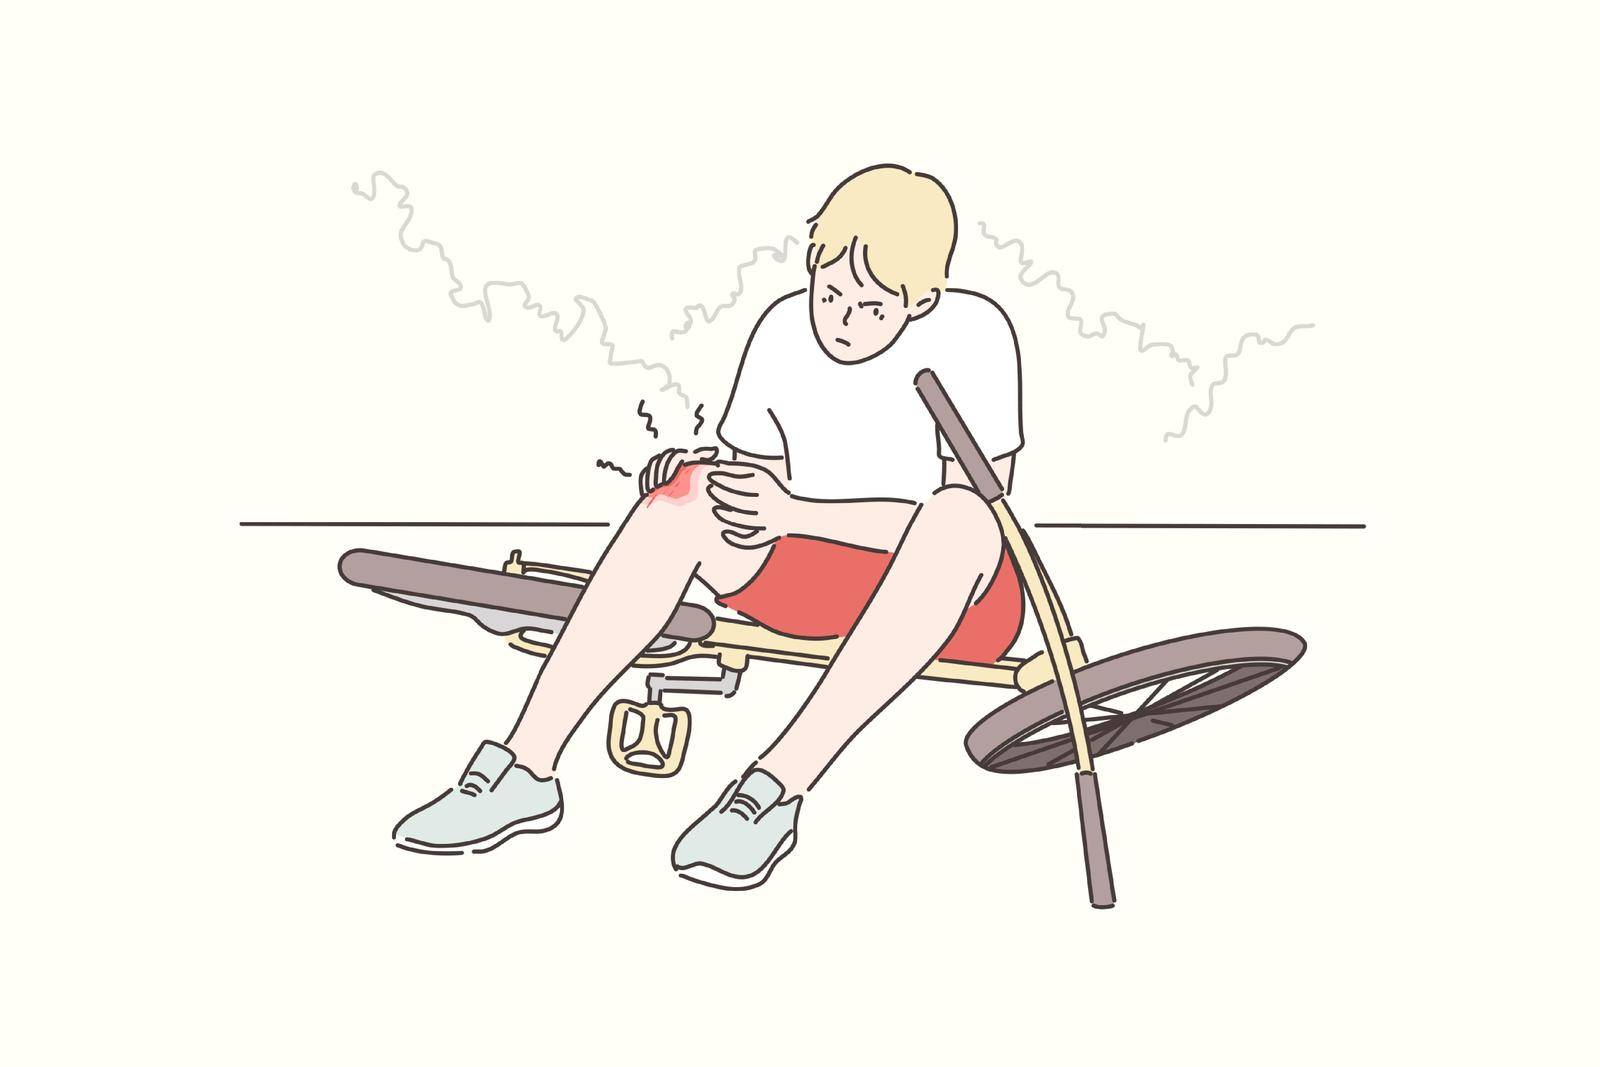 Trauma, sport, cycling, pain, anger concept. Young sad angry boy teenager cartoon character fell down from bike and got injured knee painfully. Summer holiday recreation active lifestyle illustration.